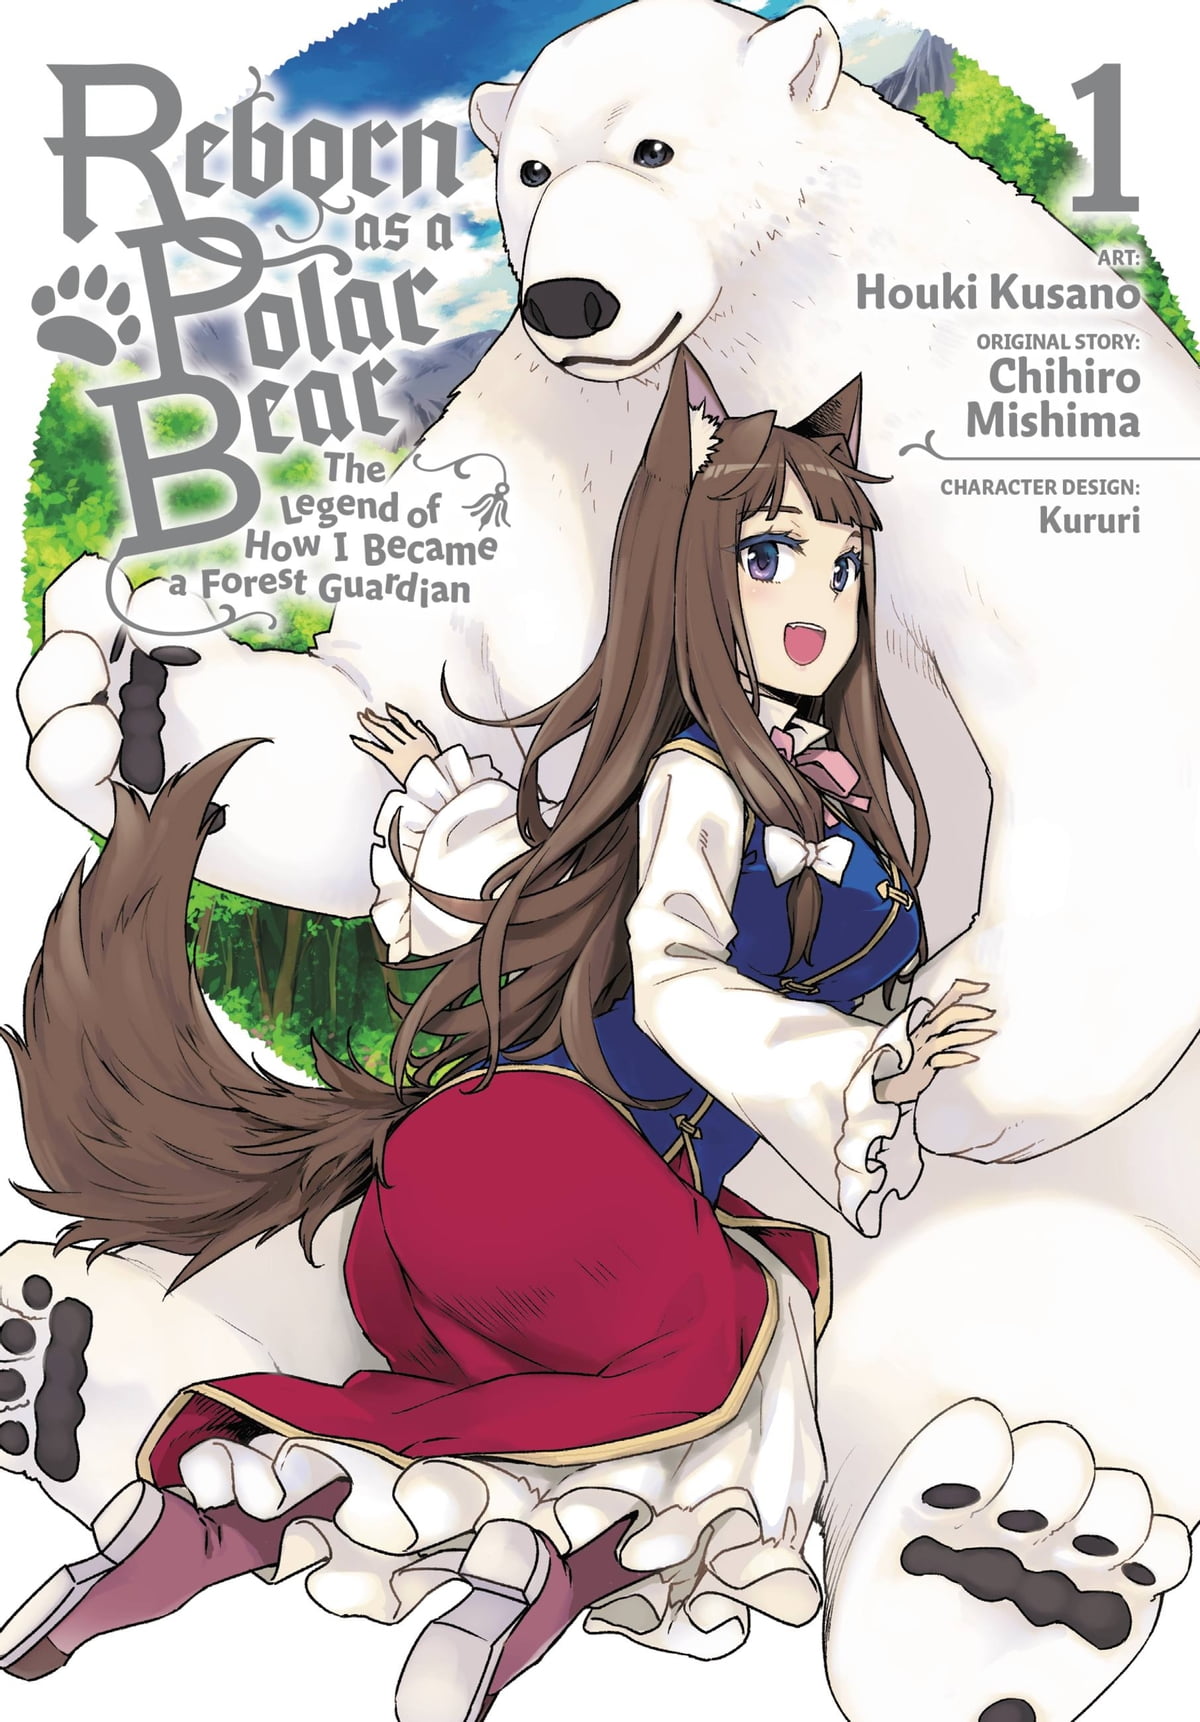 Reborn as a Polar Bear: The Legend of How I Became a Forest Guardian Volume 1 Review